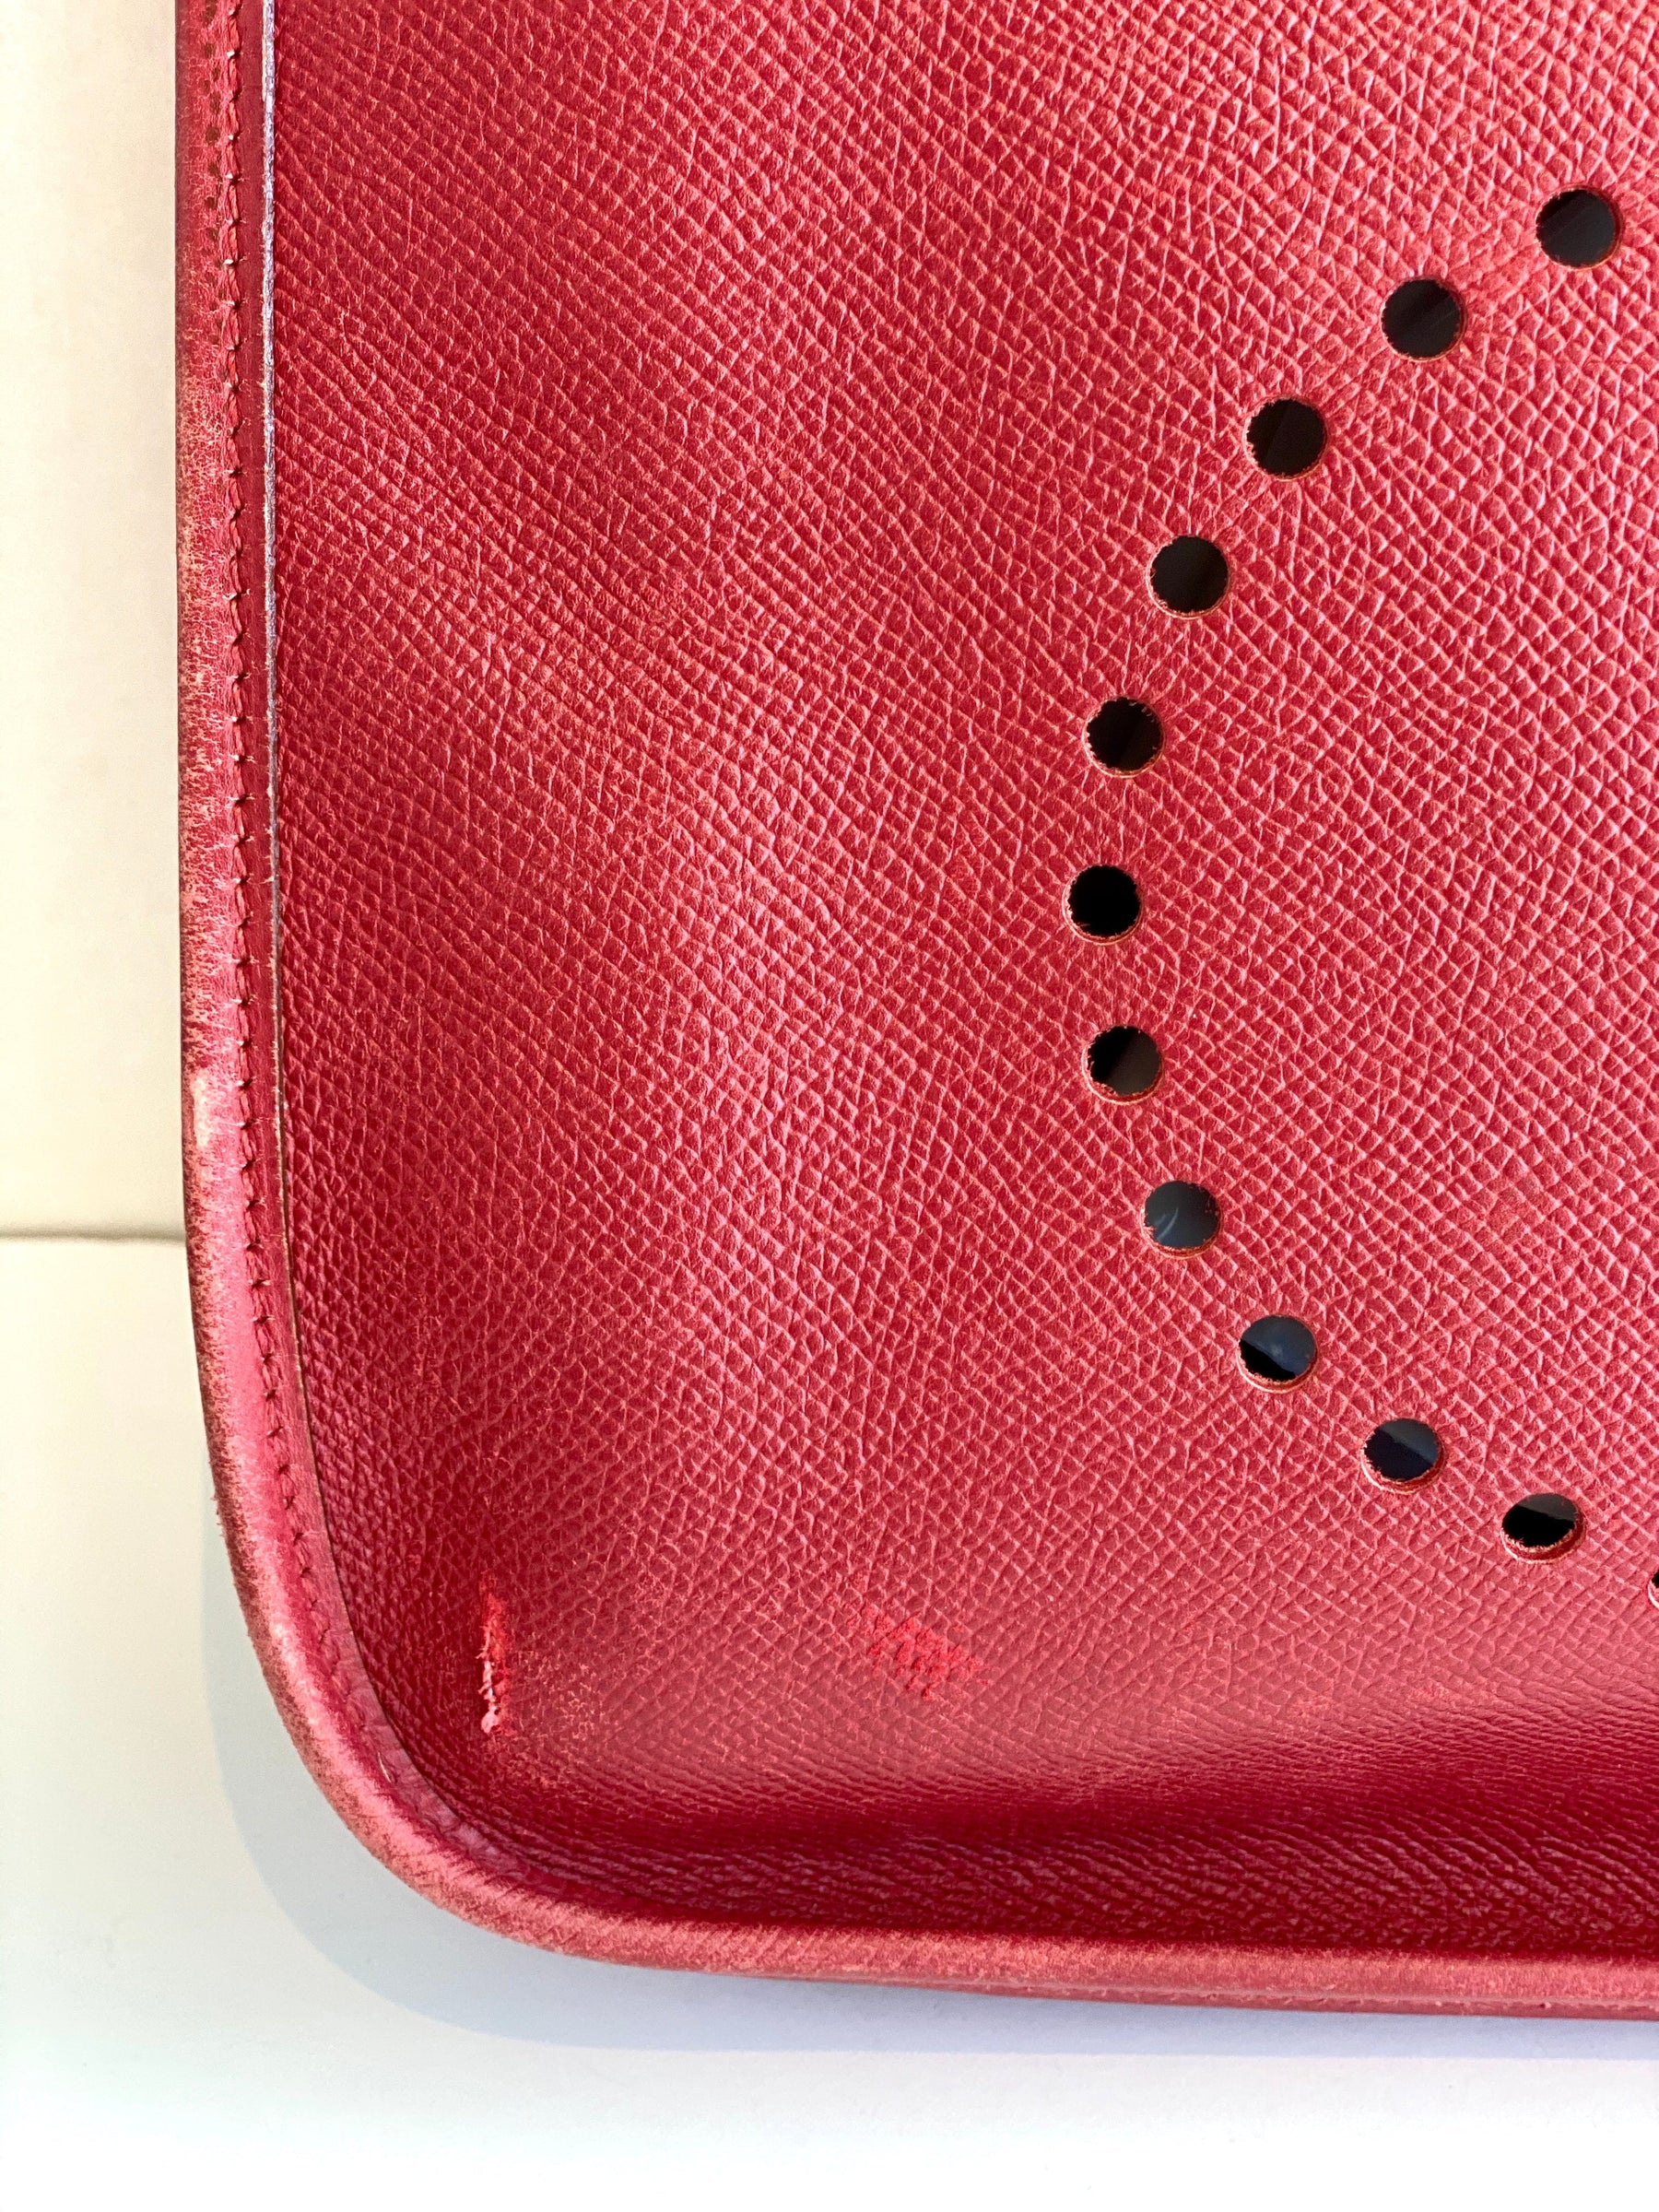 sign of wear on the red leather hermes bag